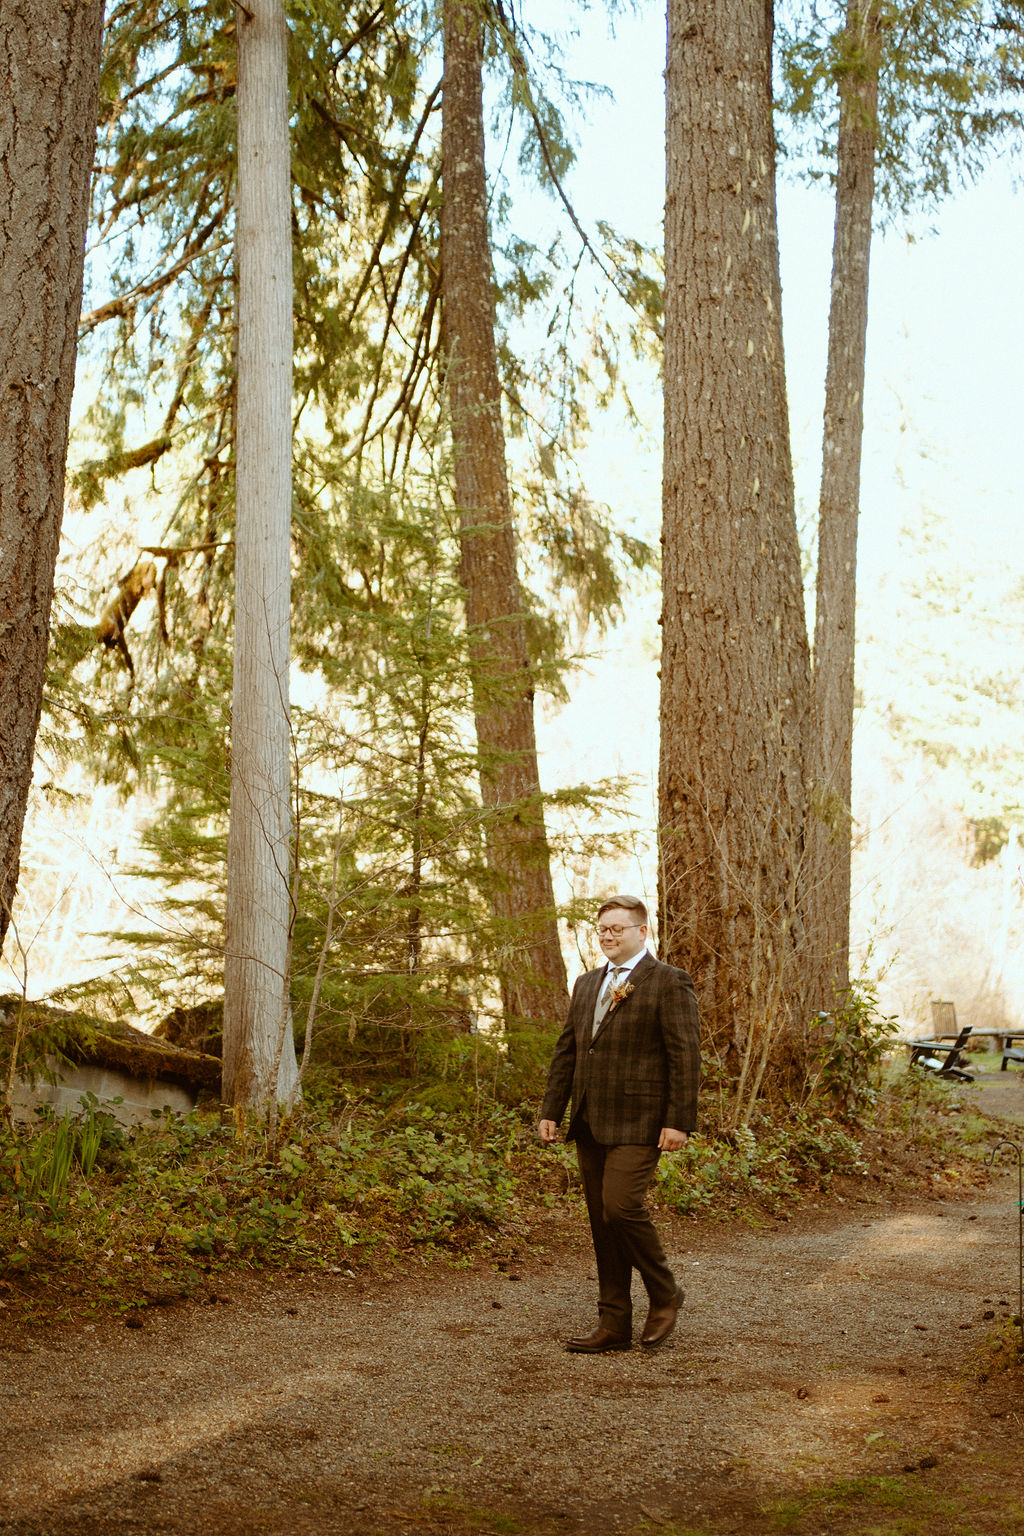 The groom walking down the aisle in between trees and greenery shrubs in a plaid suit with a small wildflower boutonniere 